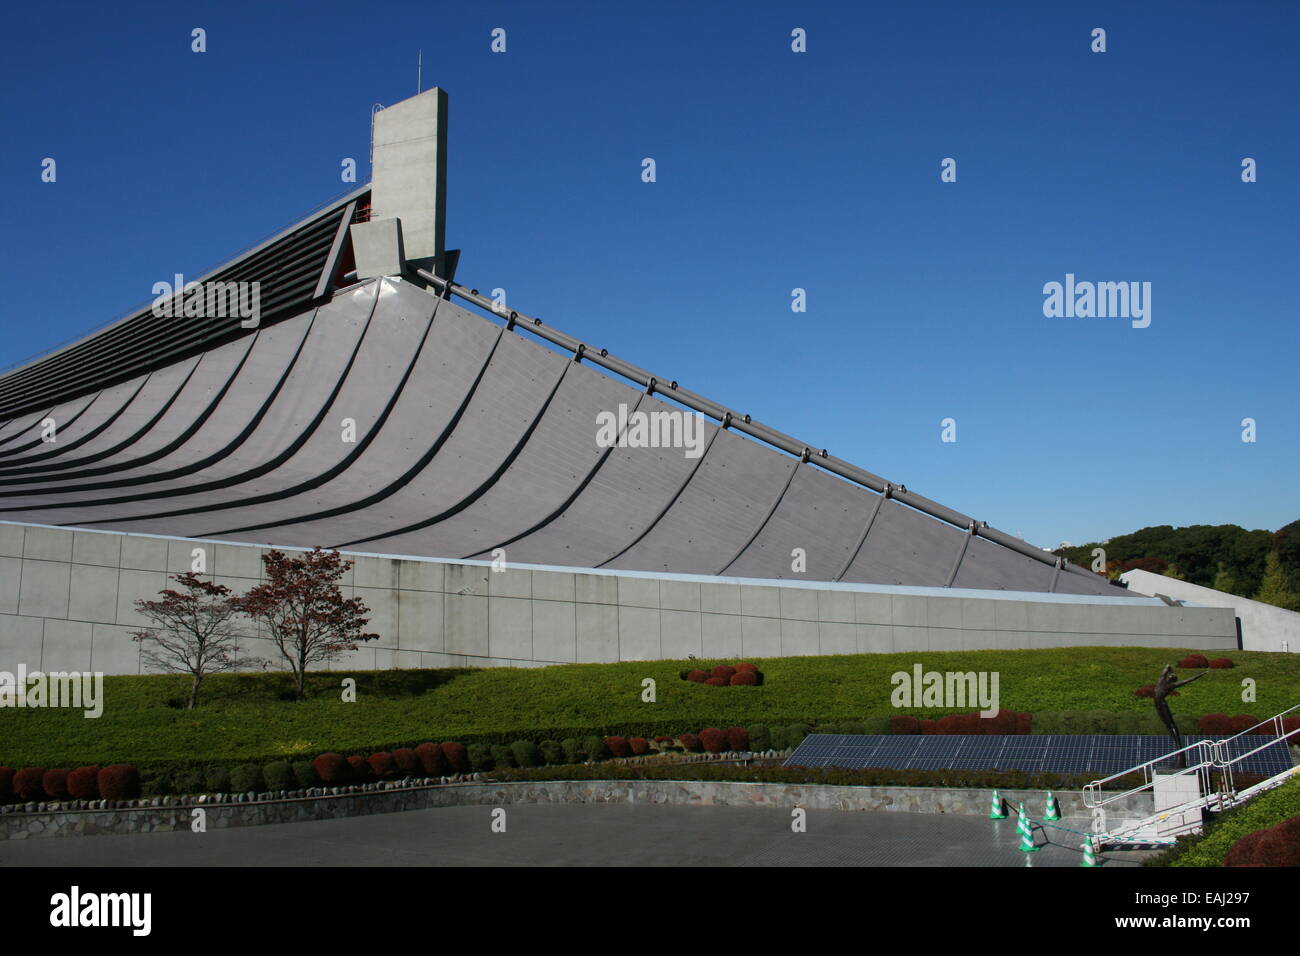 Side view of Kenzo Tange-designed Tokyo Olympic Gymnasium No. 1 built for the 1964 Tokyo Olympics Stock Photo